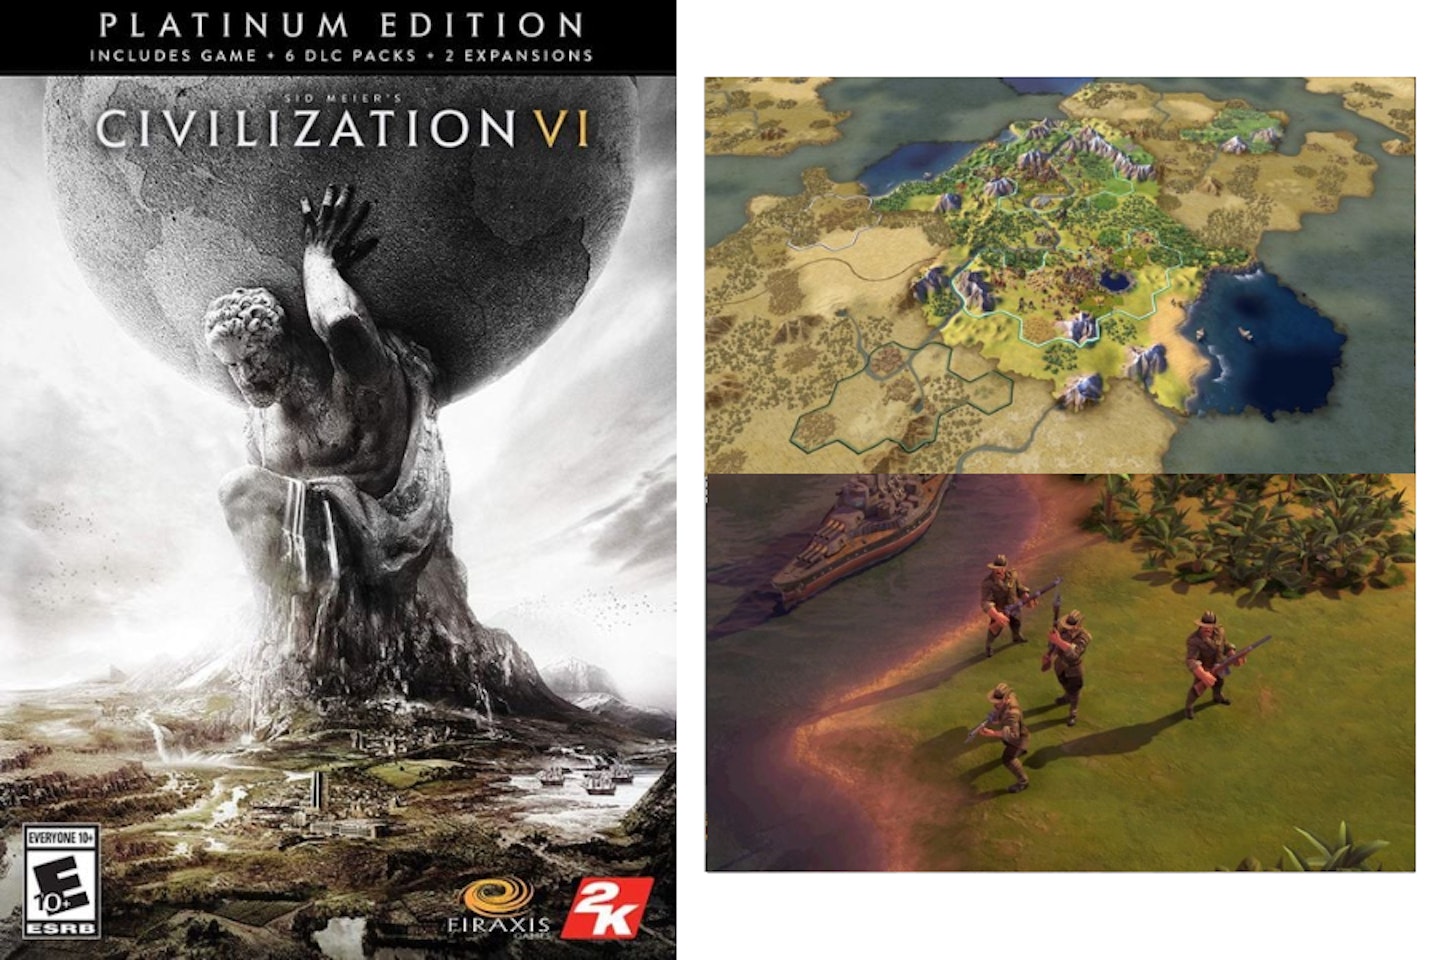 Civilization VI- one of the best PC games